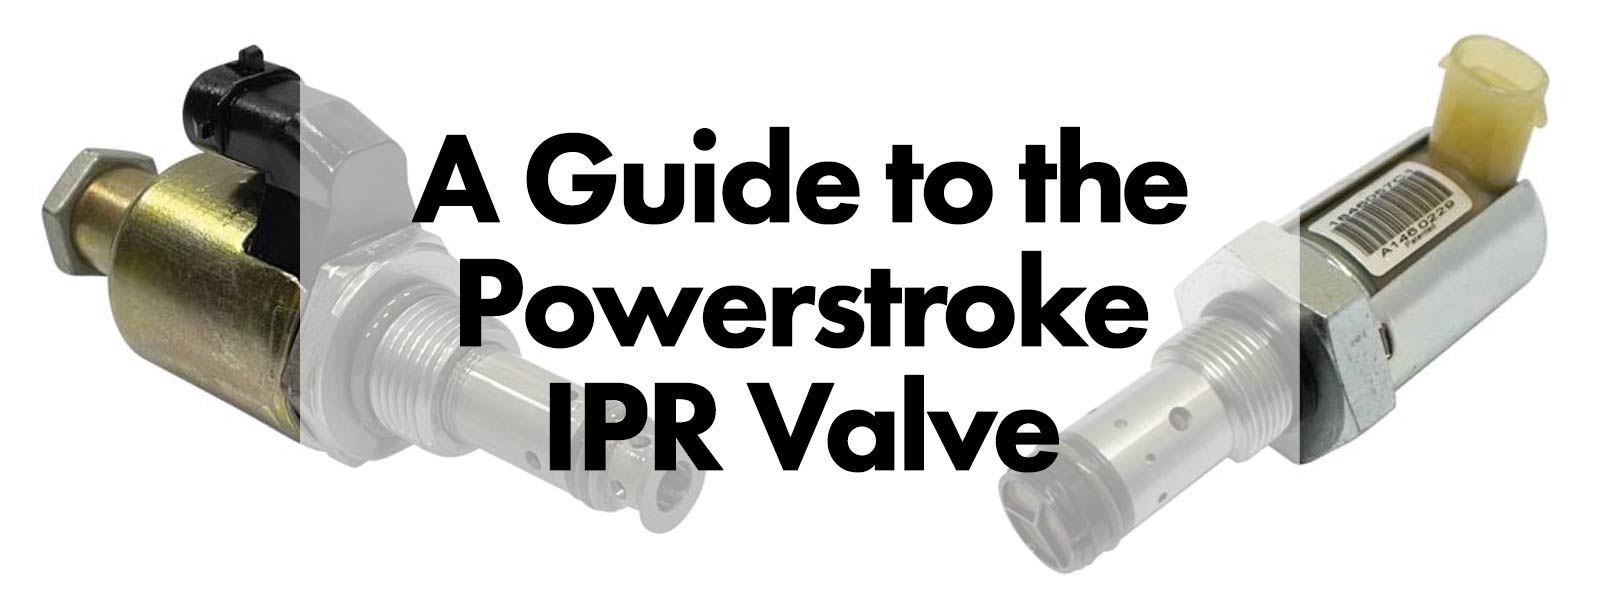 A Guide to the Powerstroke IPR Valve